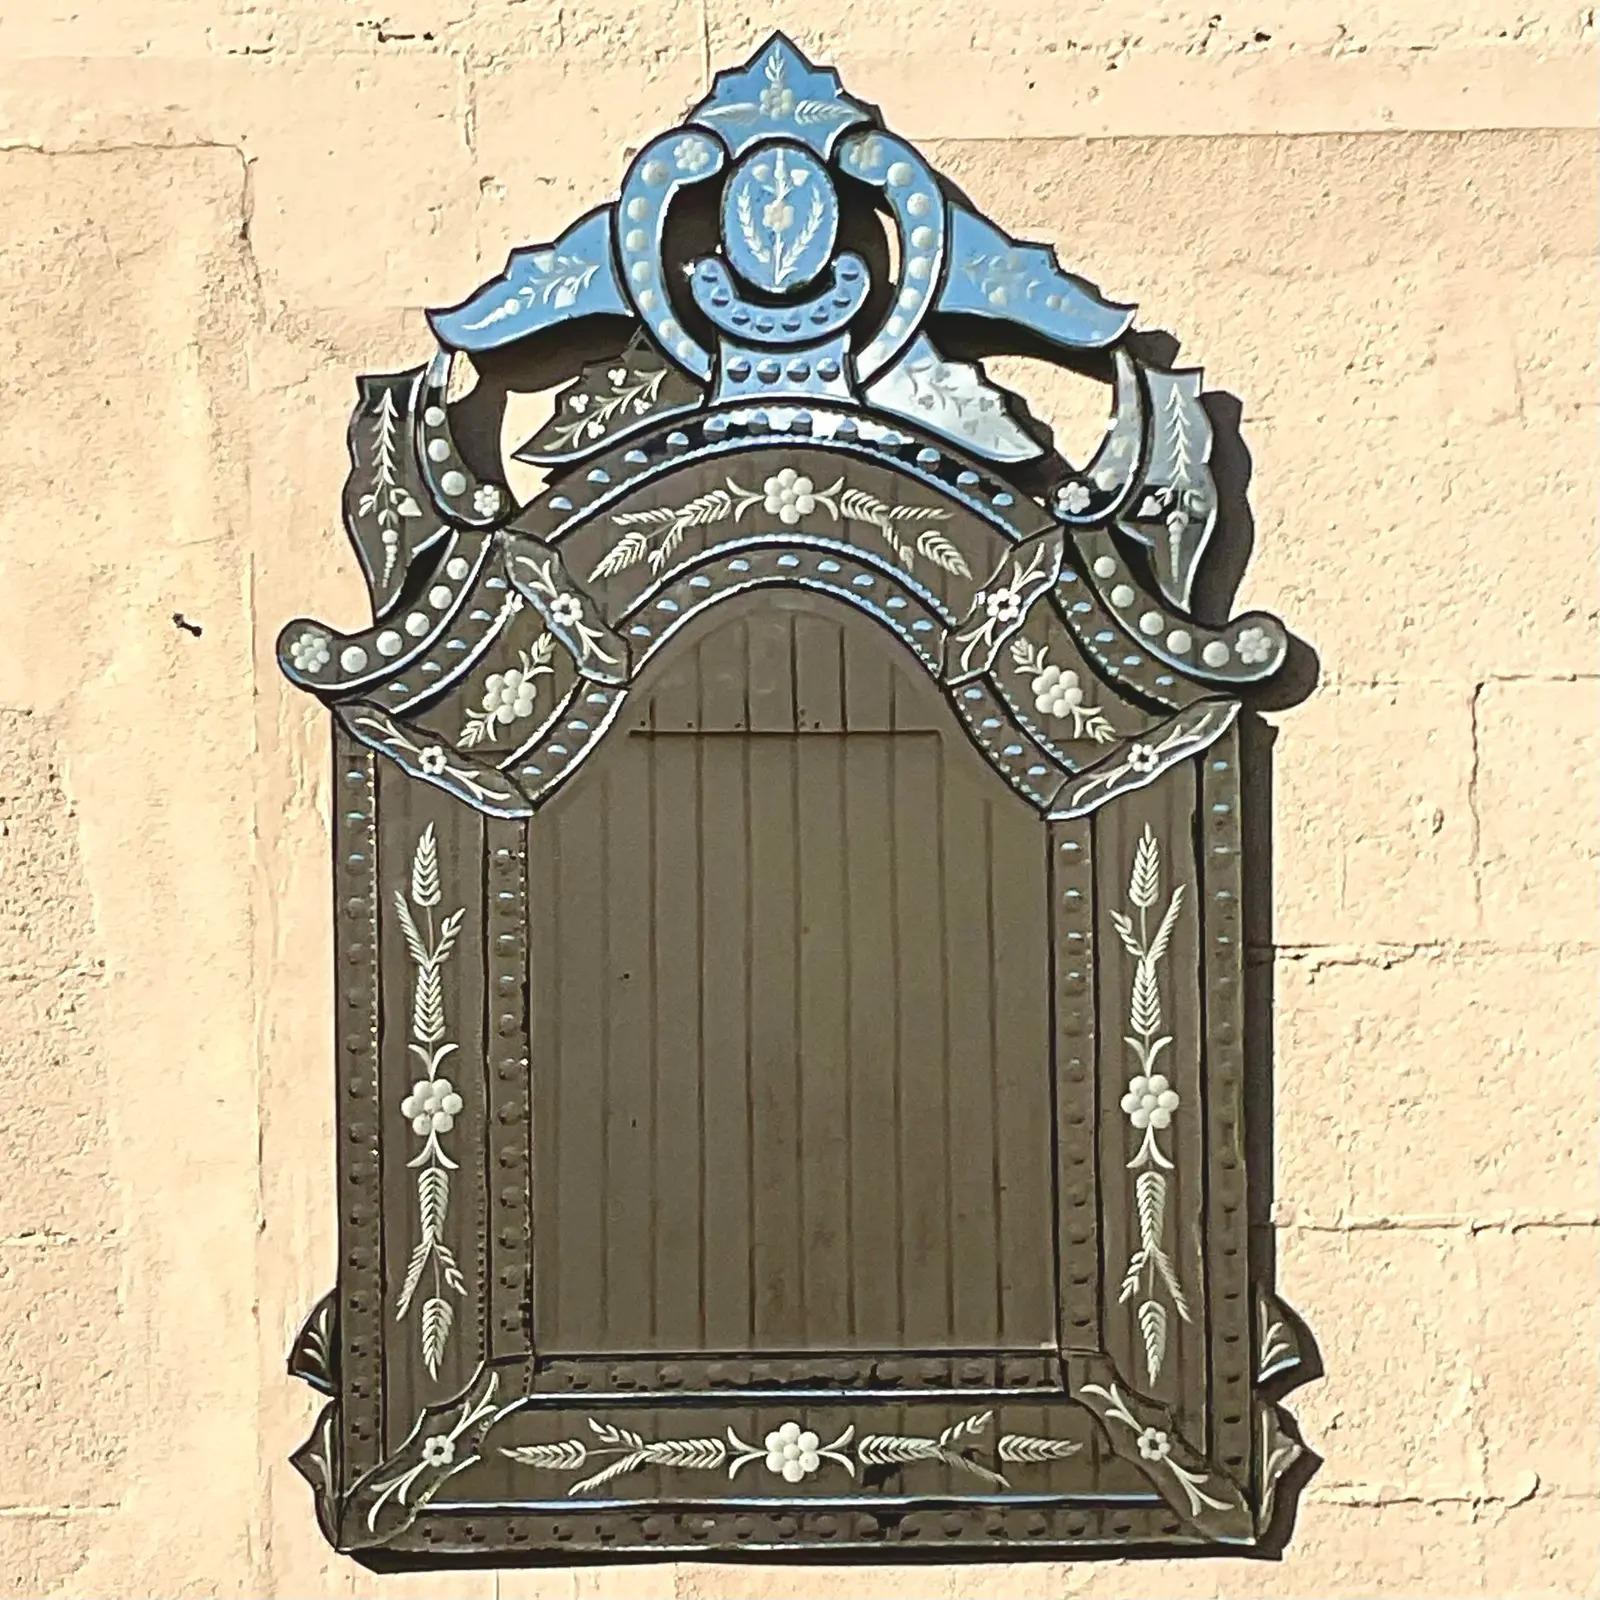 A fantastic vintage Regency wall mirror. Made by Restoration Hardware. The large French Rococo style with all the beautiful etched detail. Acquired by a Palm Beach estate.